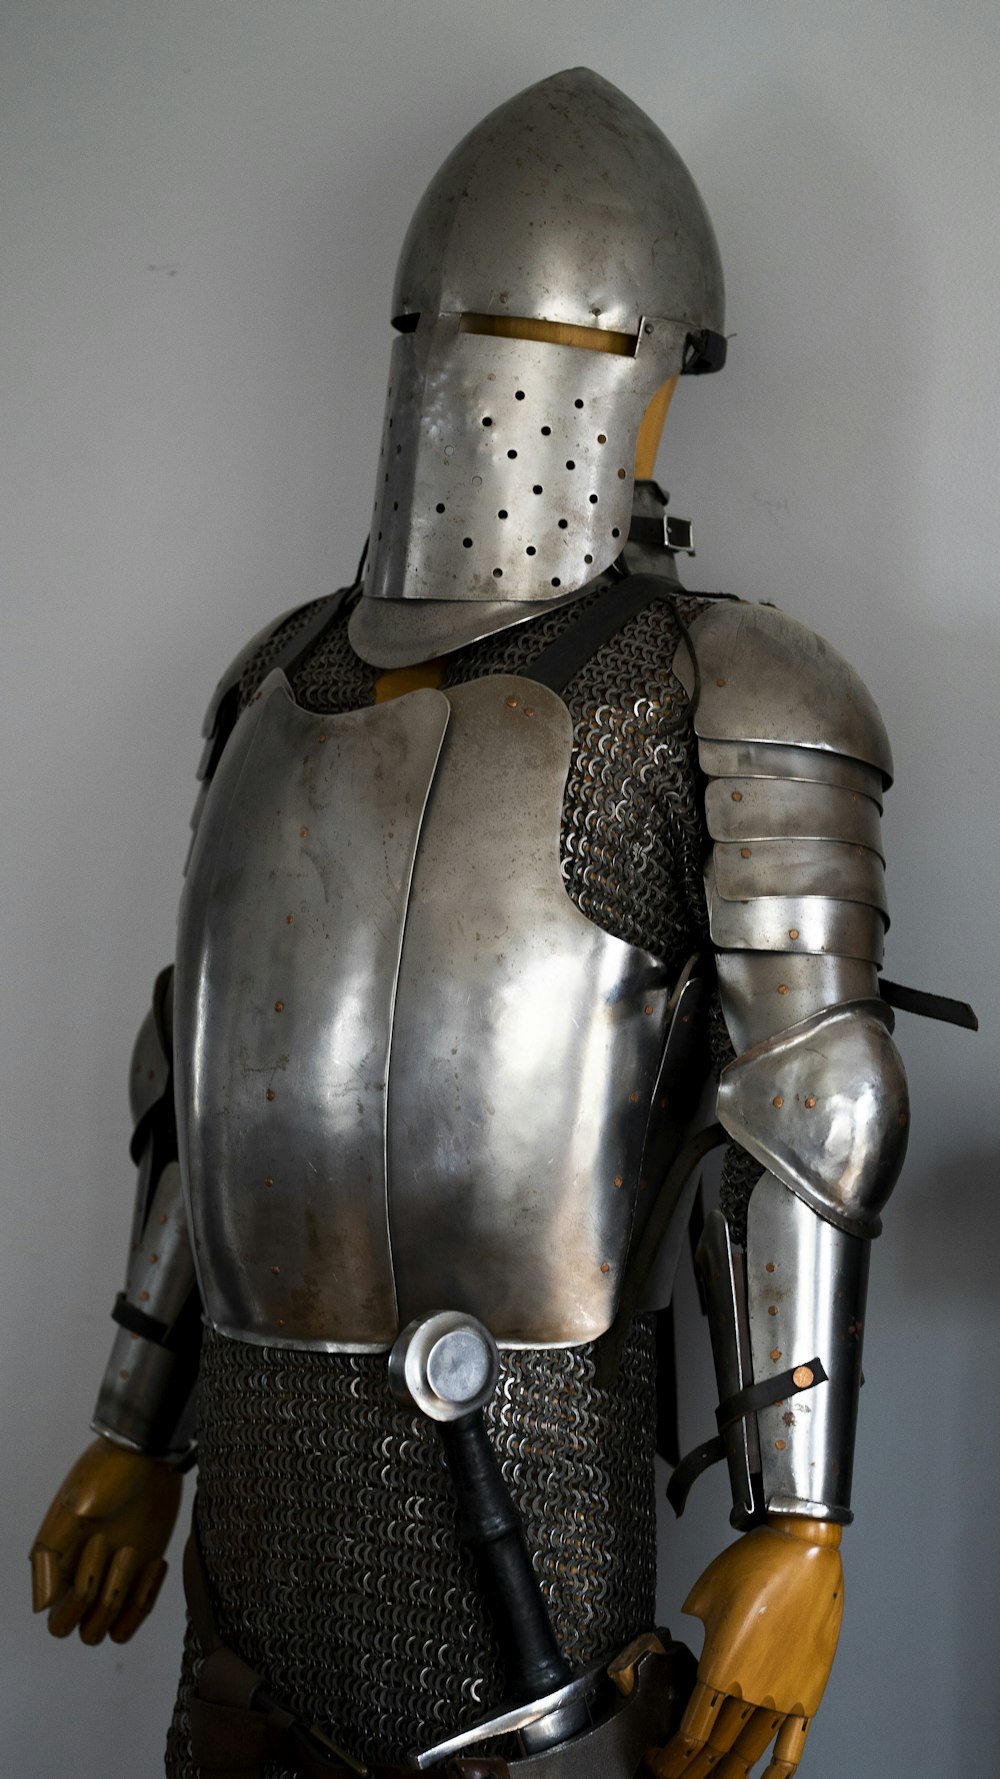 a suit of armor with a sword on display